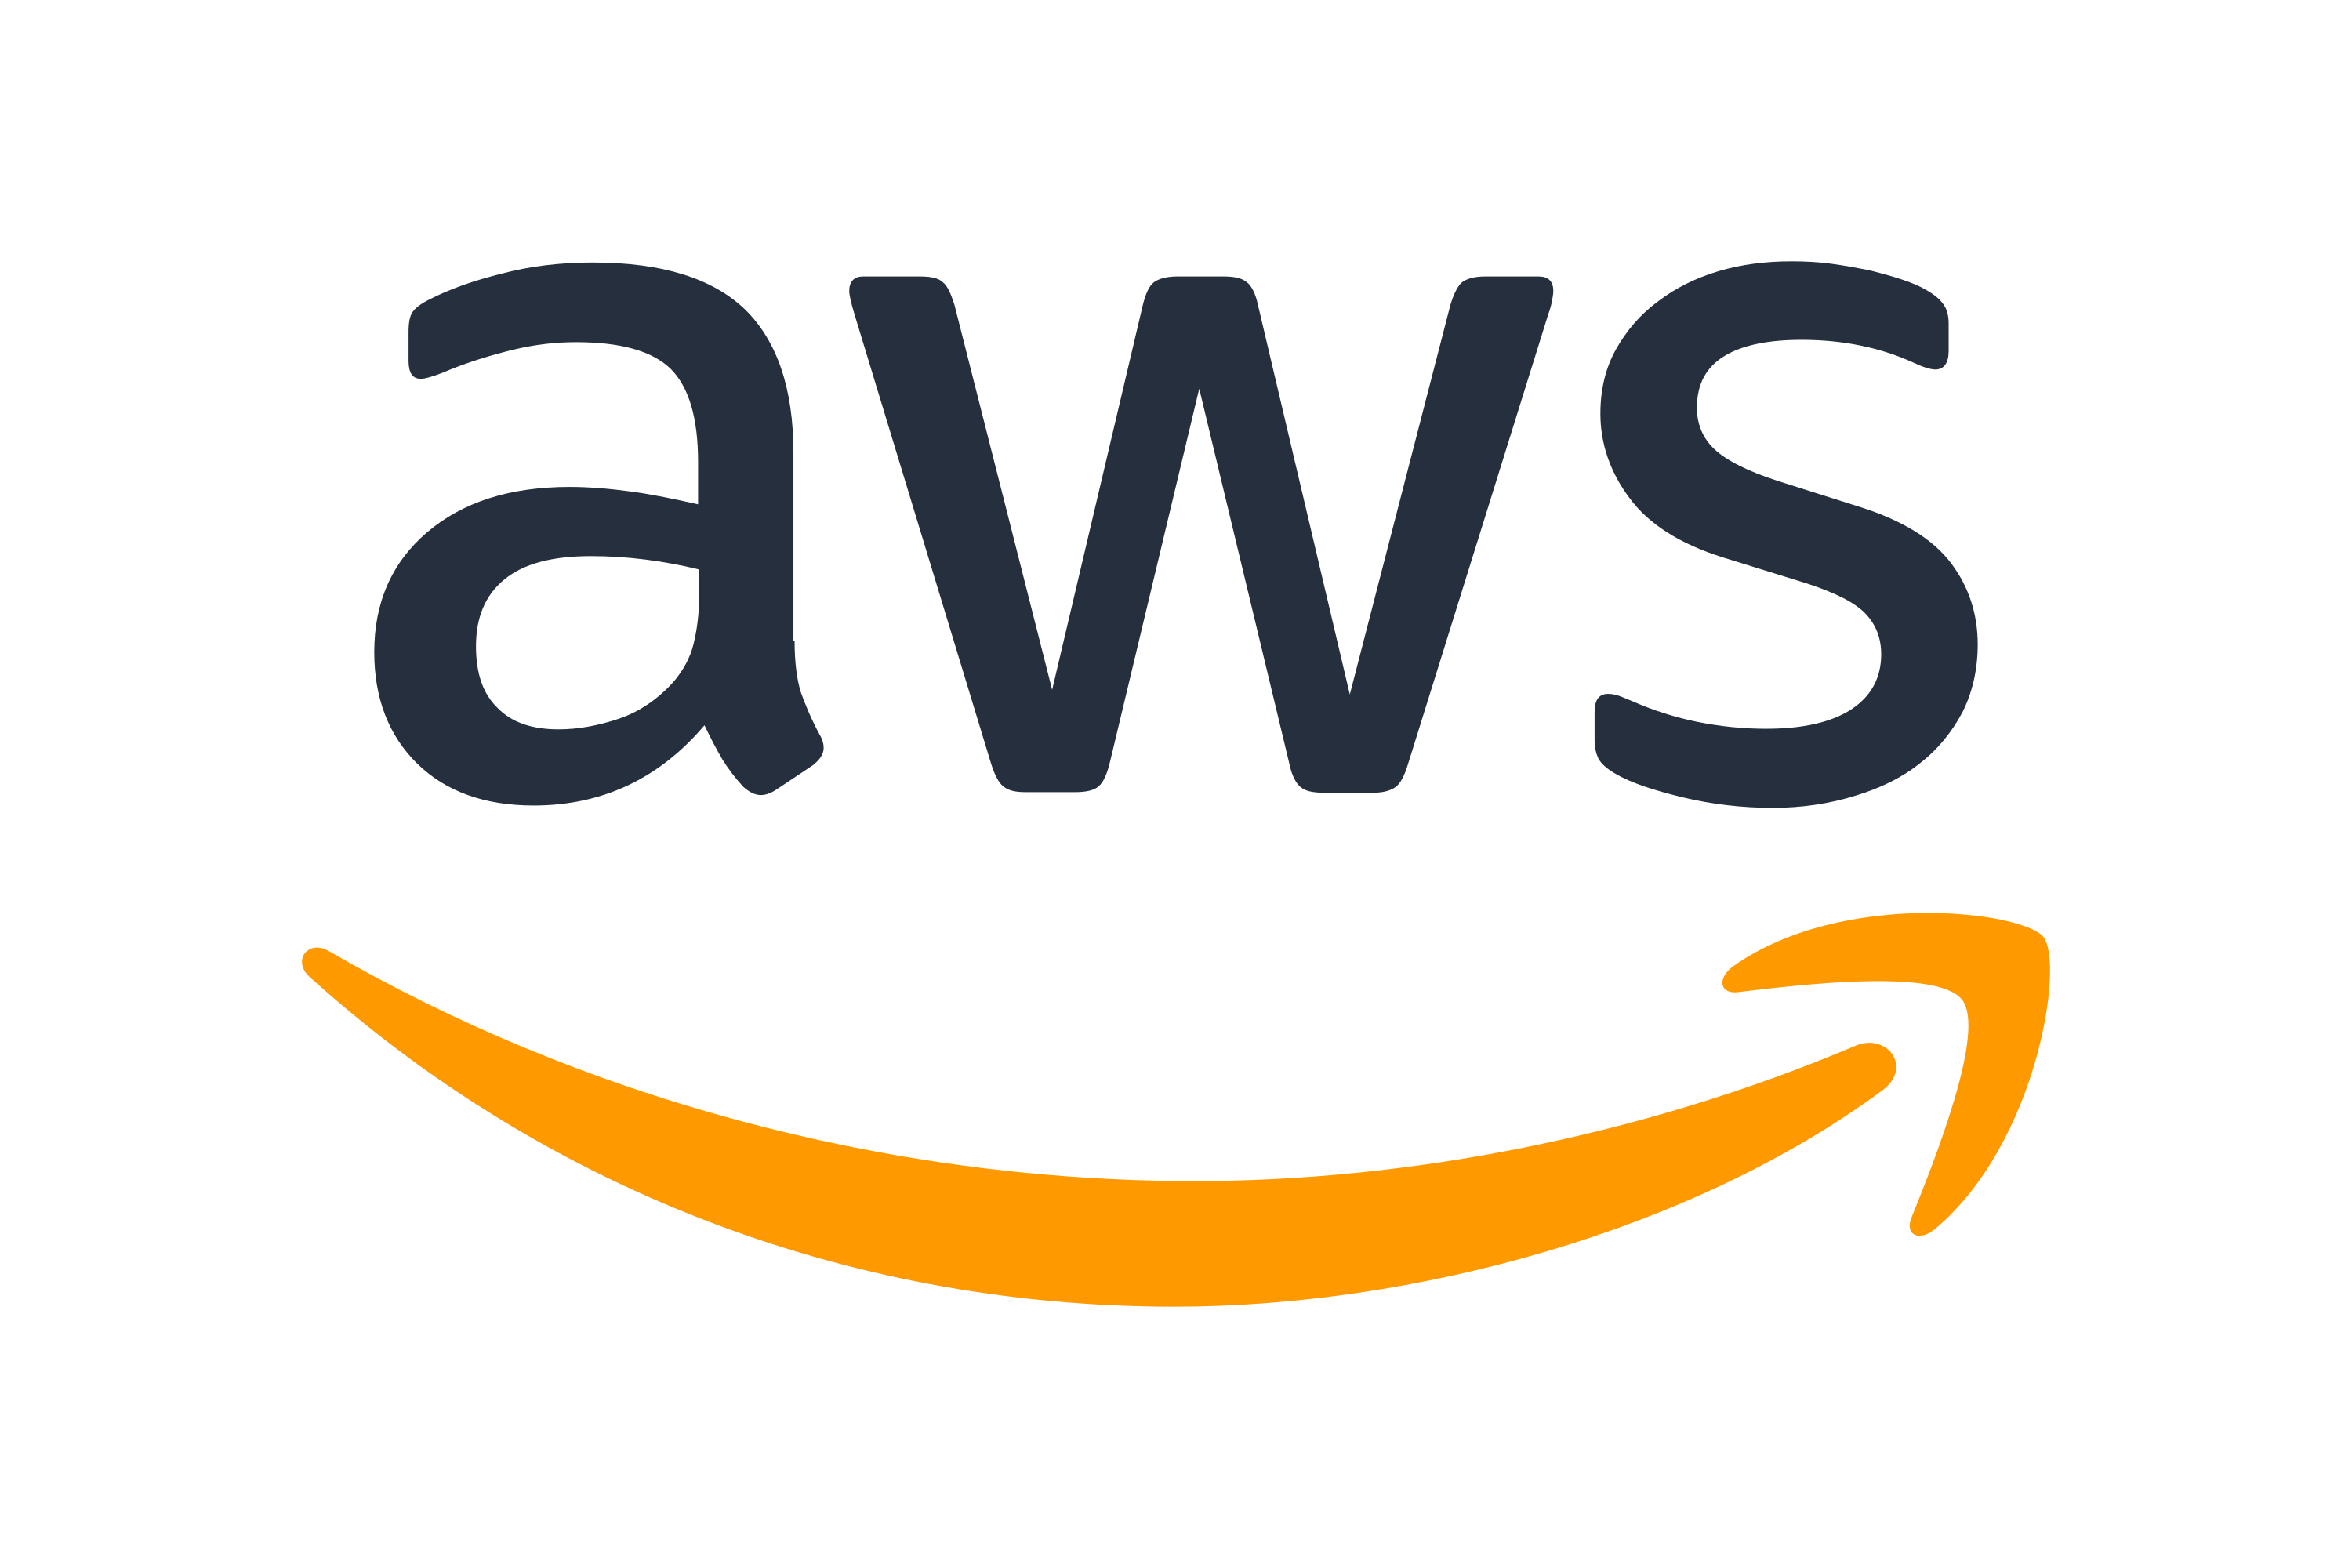 Download Amazon Web Services (AWS) Logo in SVG Vector or PNG File Format -  Logo.wine